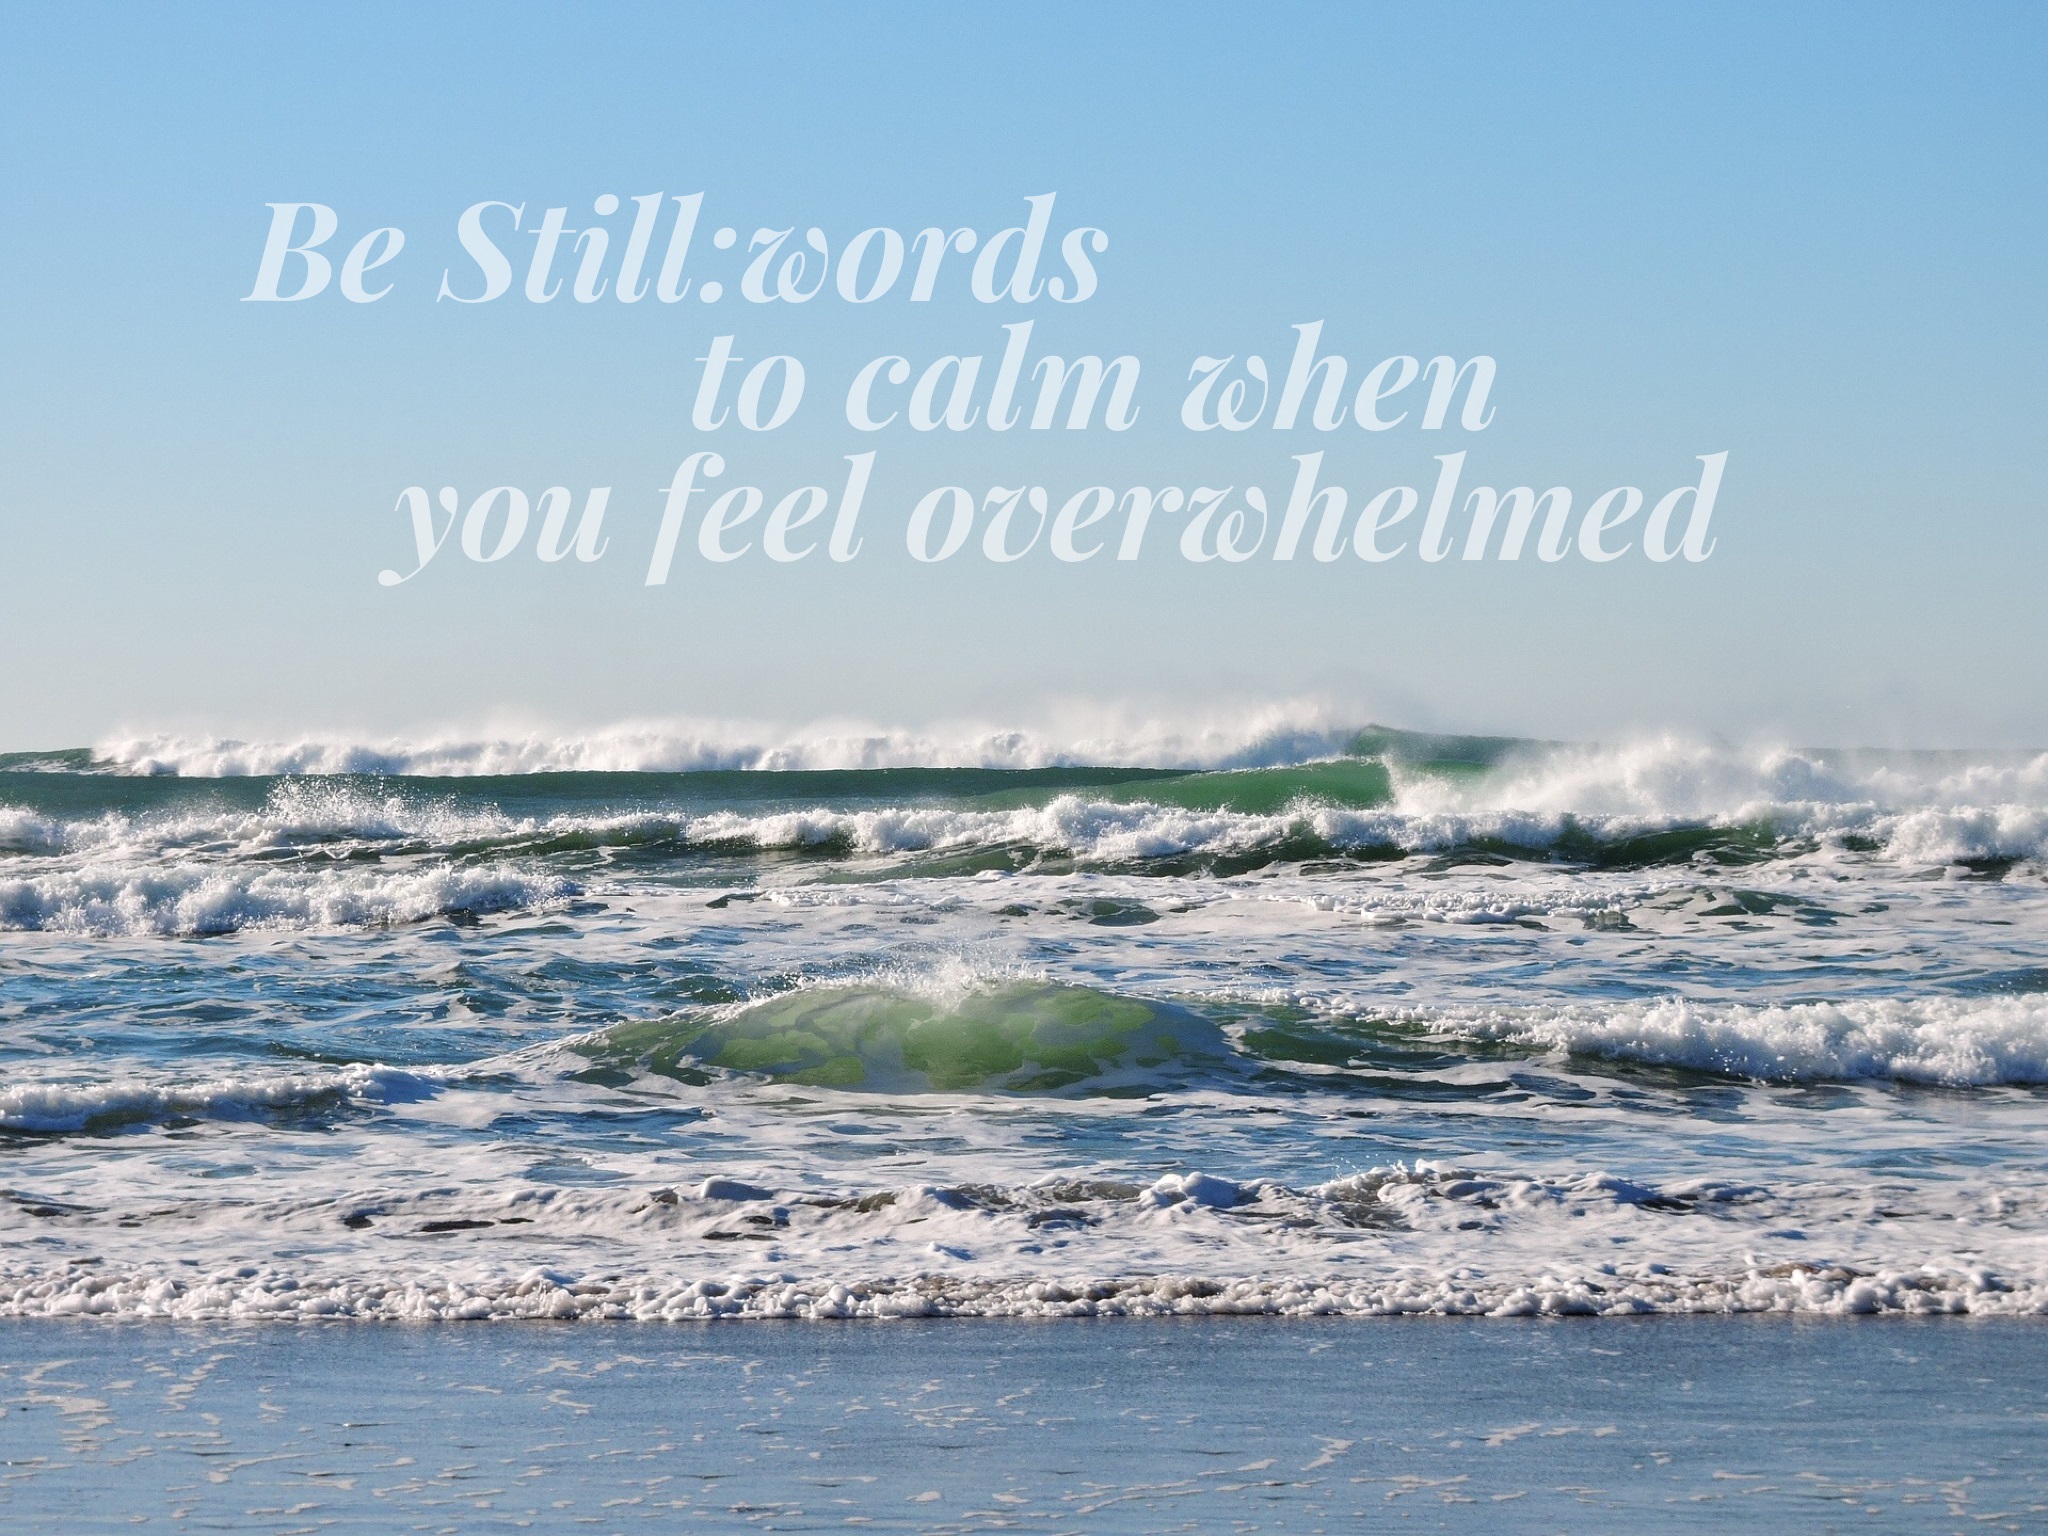 Be Still: words to calm when you feel overwhelmed